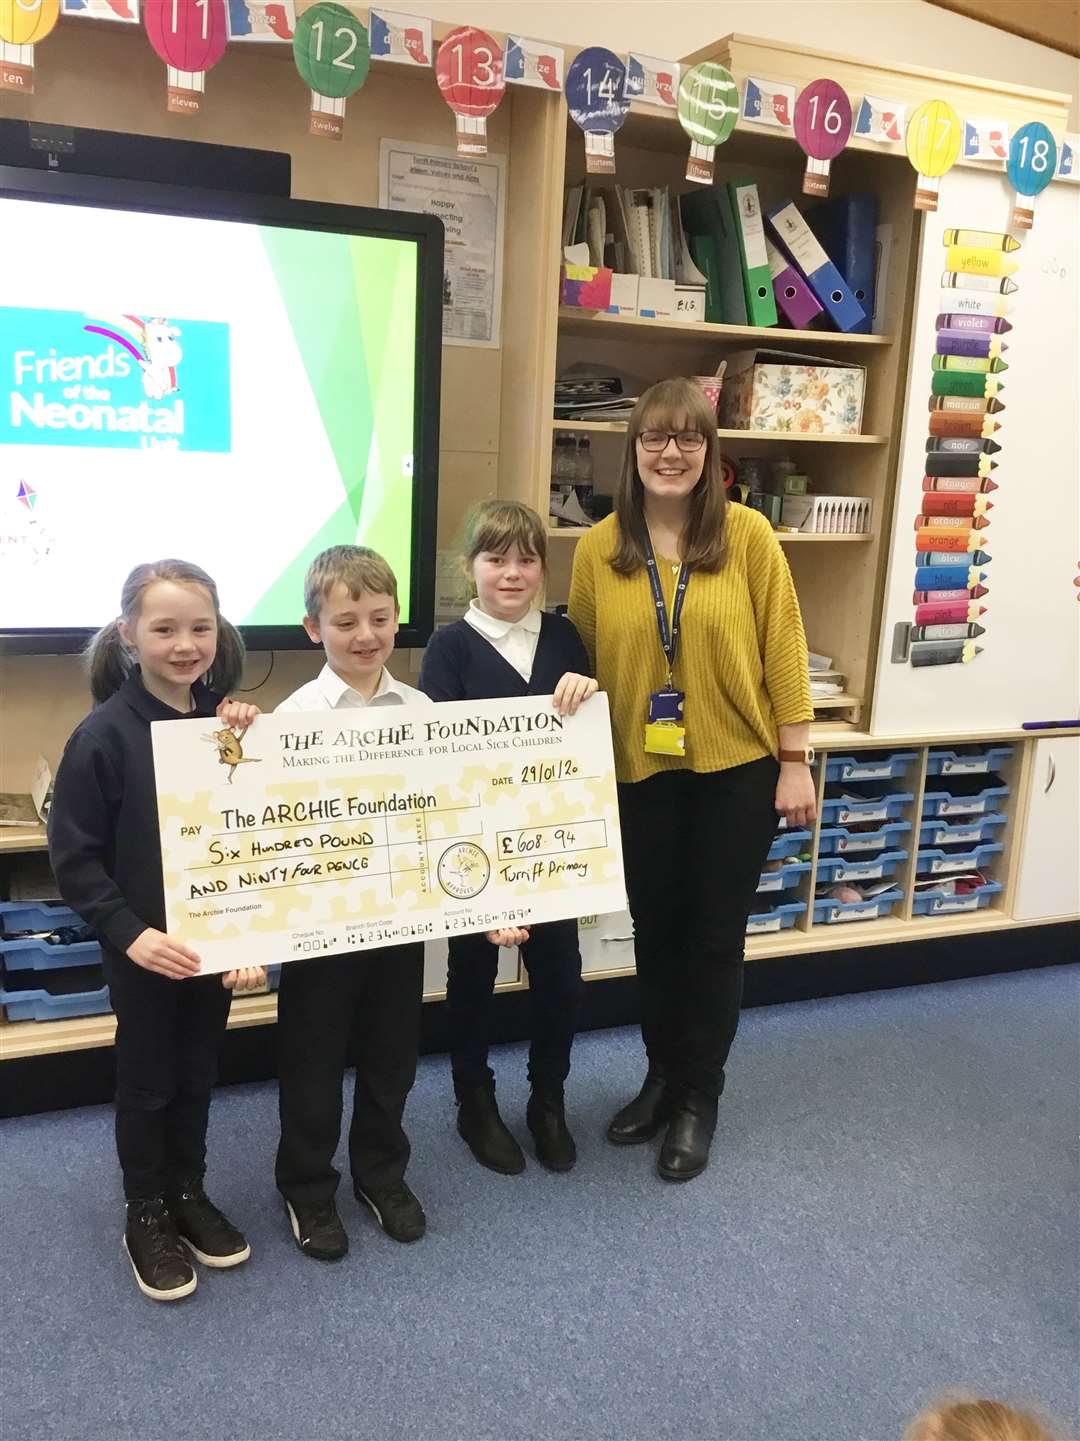 Isabella, Jenson and Emily handed over a cheque to Chloe Jackson from the Archie Foundation.